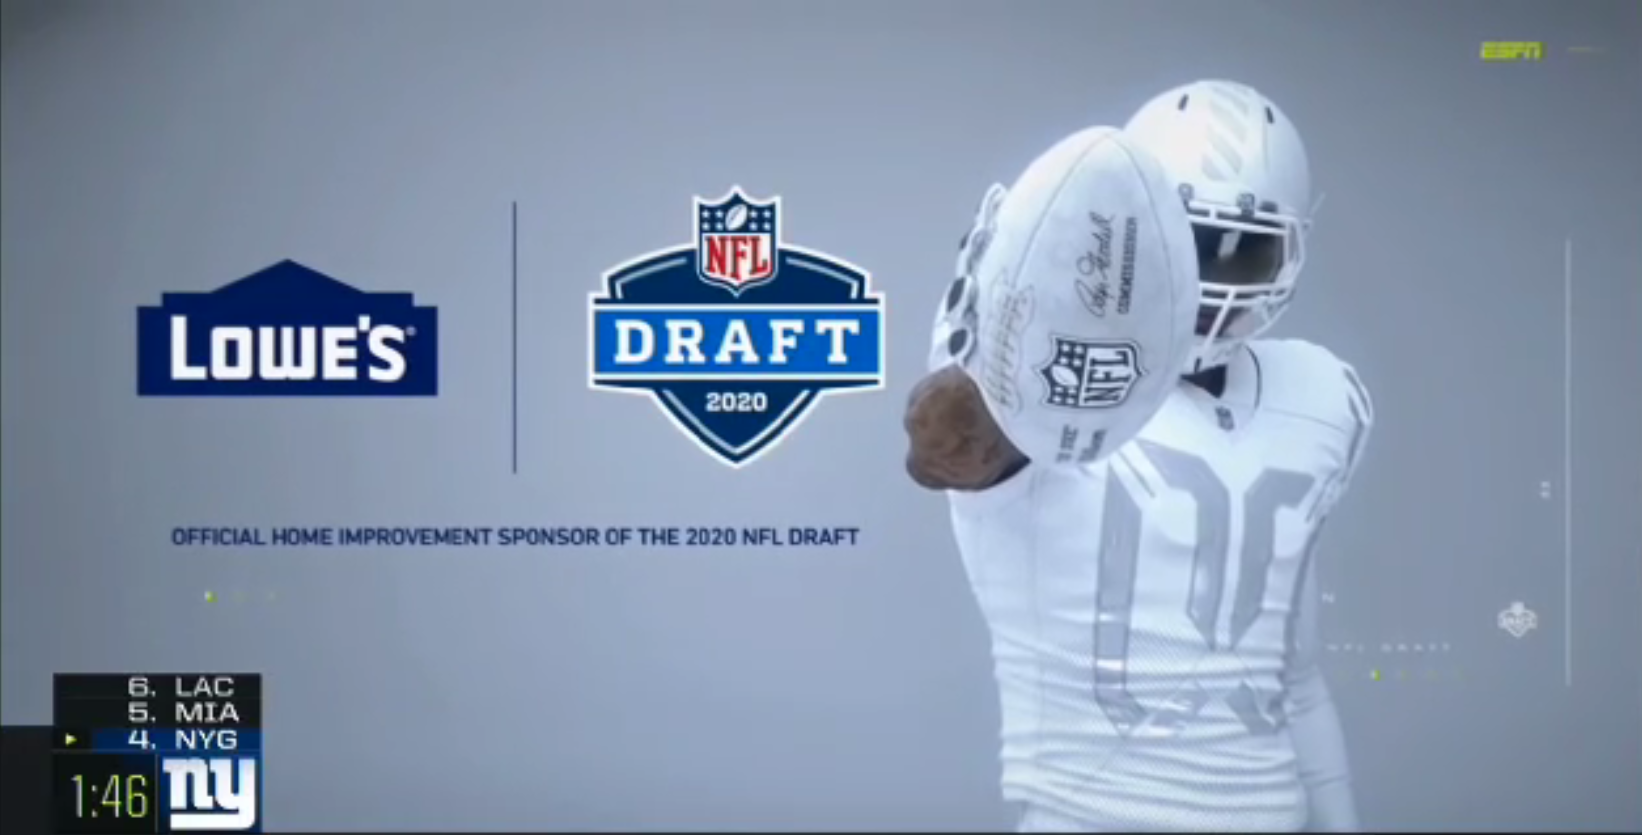 The NFL Draft 2020 Compilation Featured Image #1